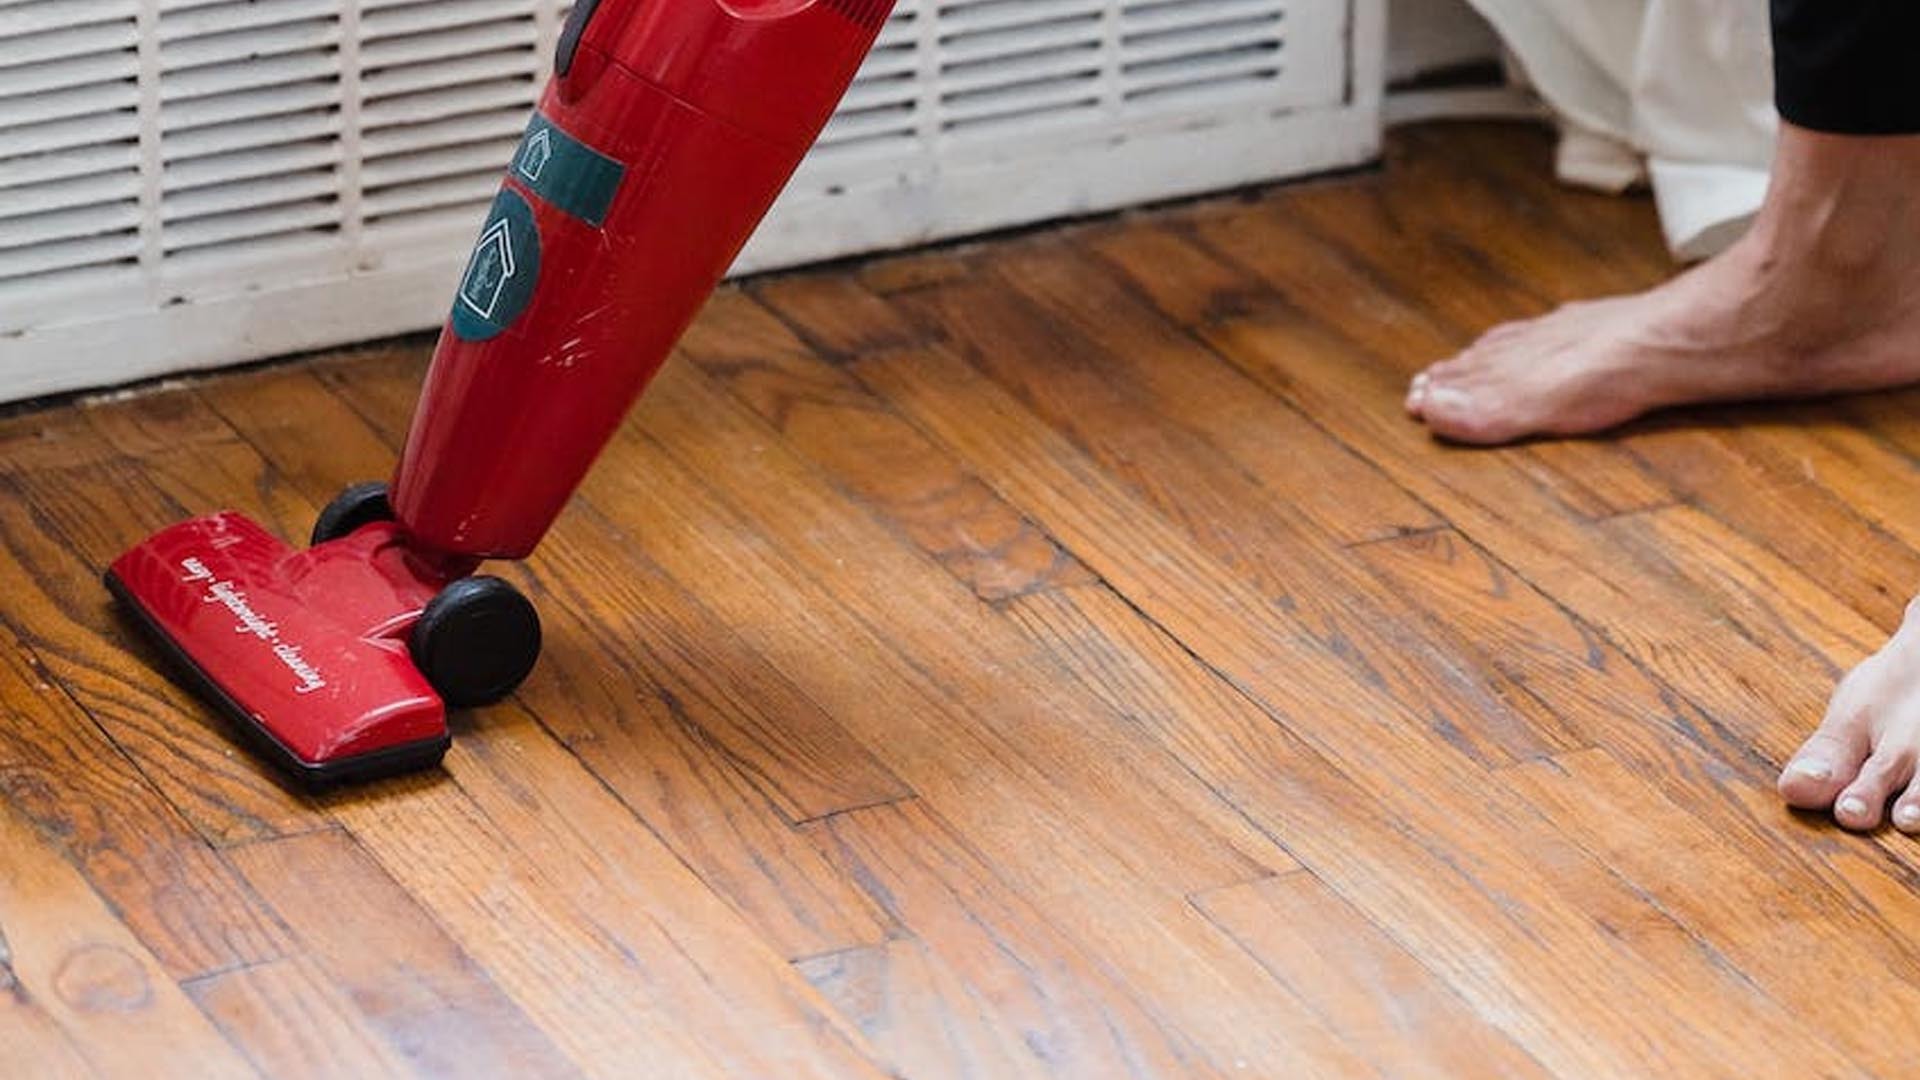 Remove term: best stick vacuums for hardwood floors best stick vacuums for hardwood floors